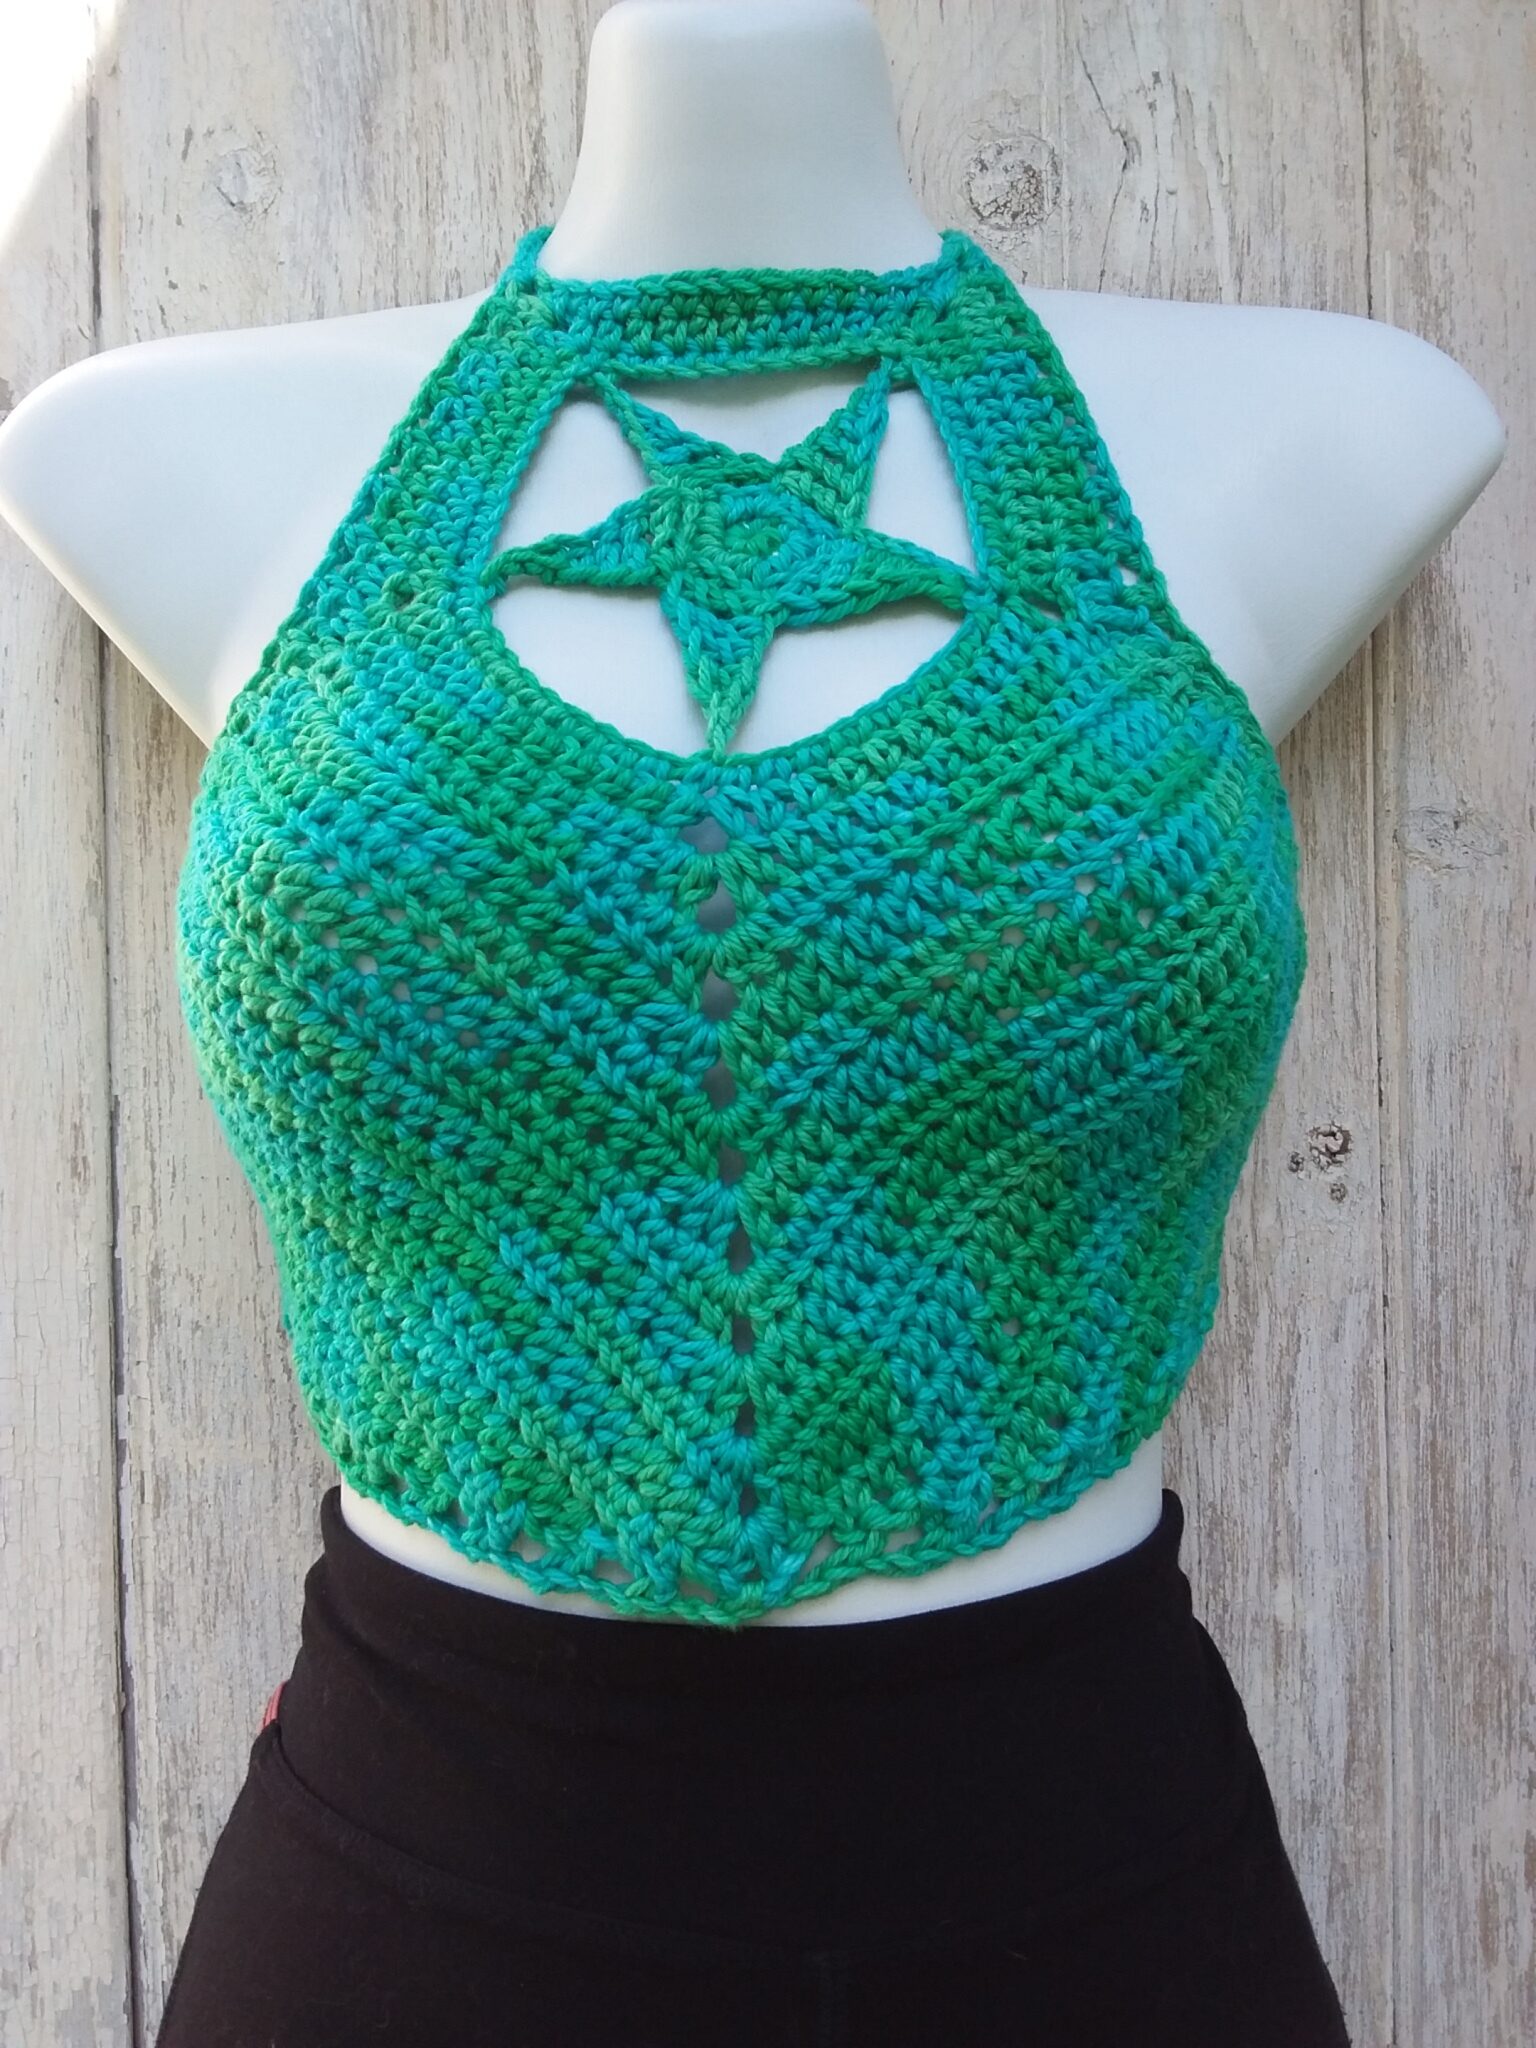 Crochet crop top halter with star design in hand dyed organic cotton yarn of shades of green and blue